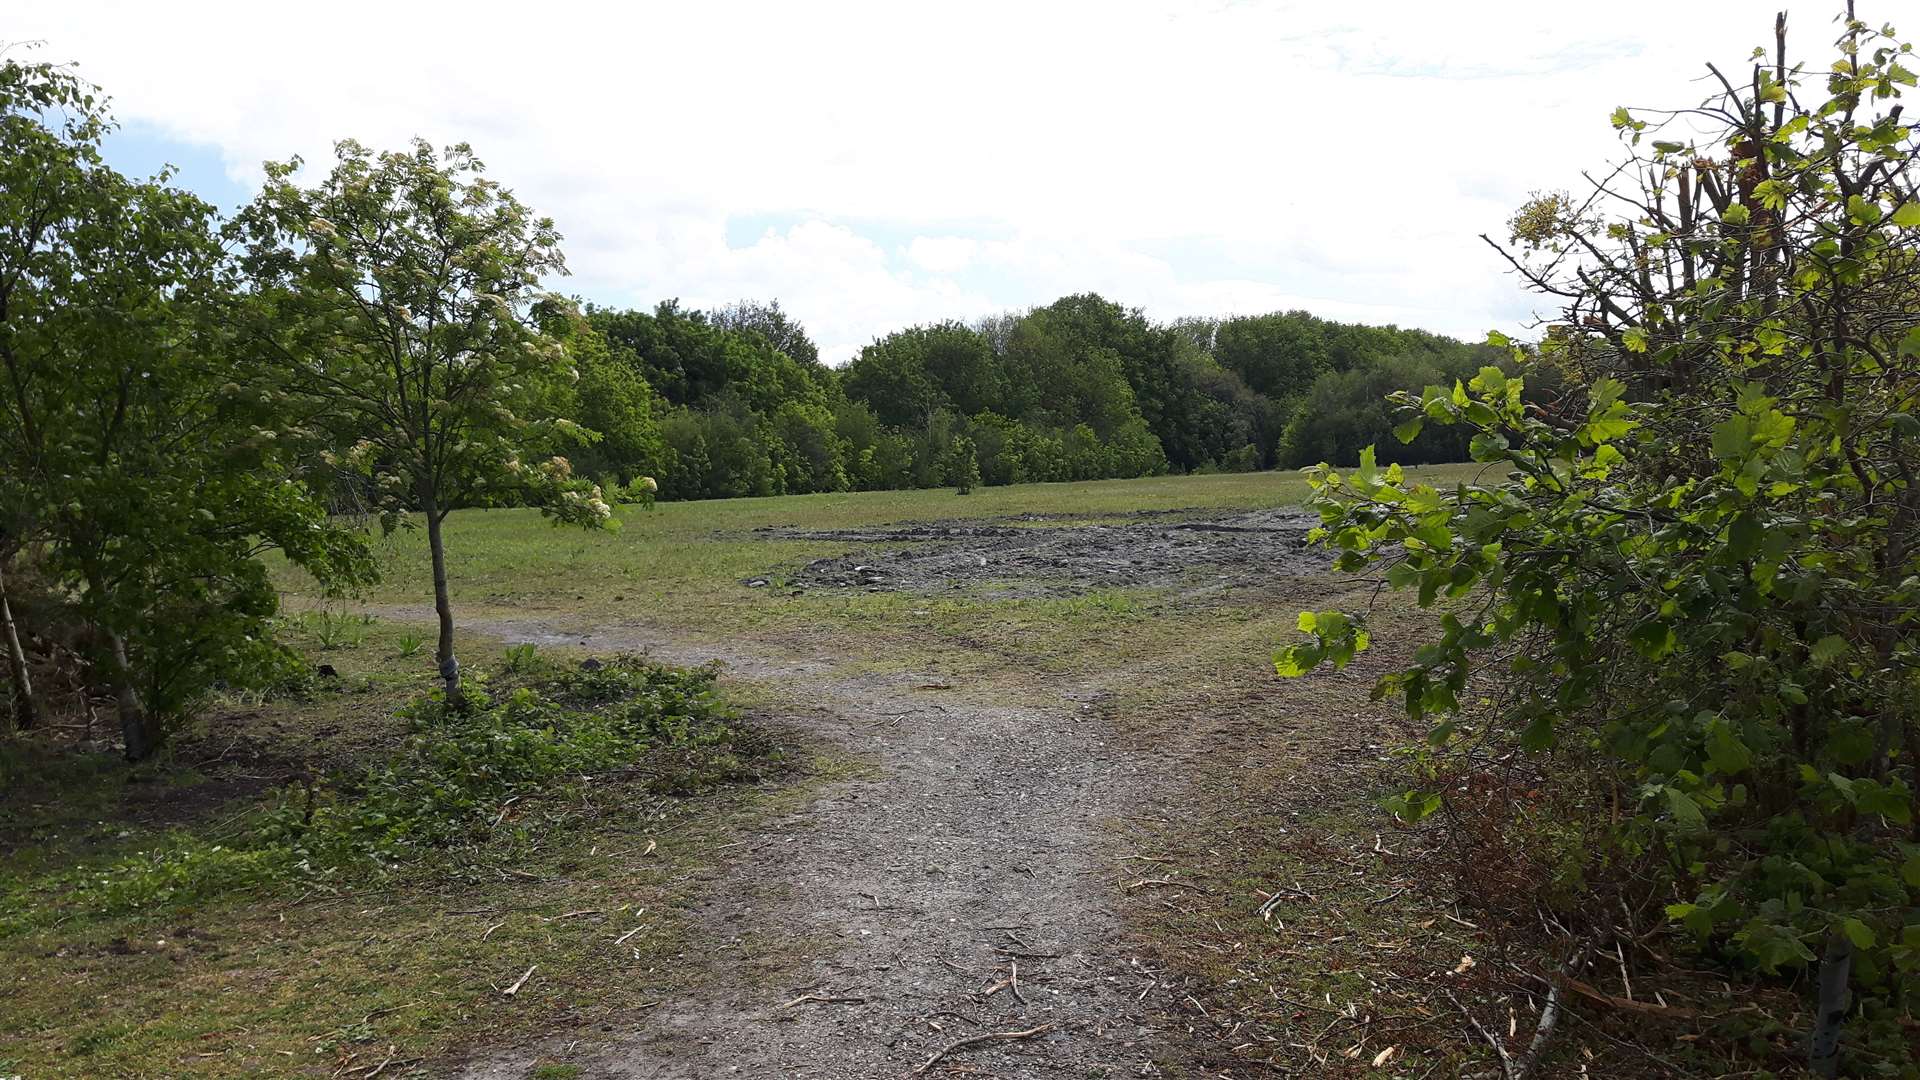 The proposed building site is either side of Colliers Way in Betteshanger